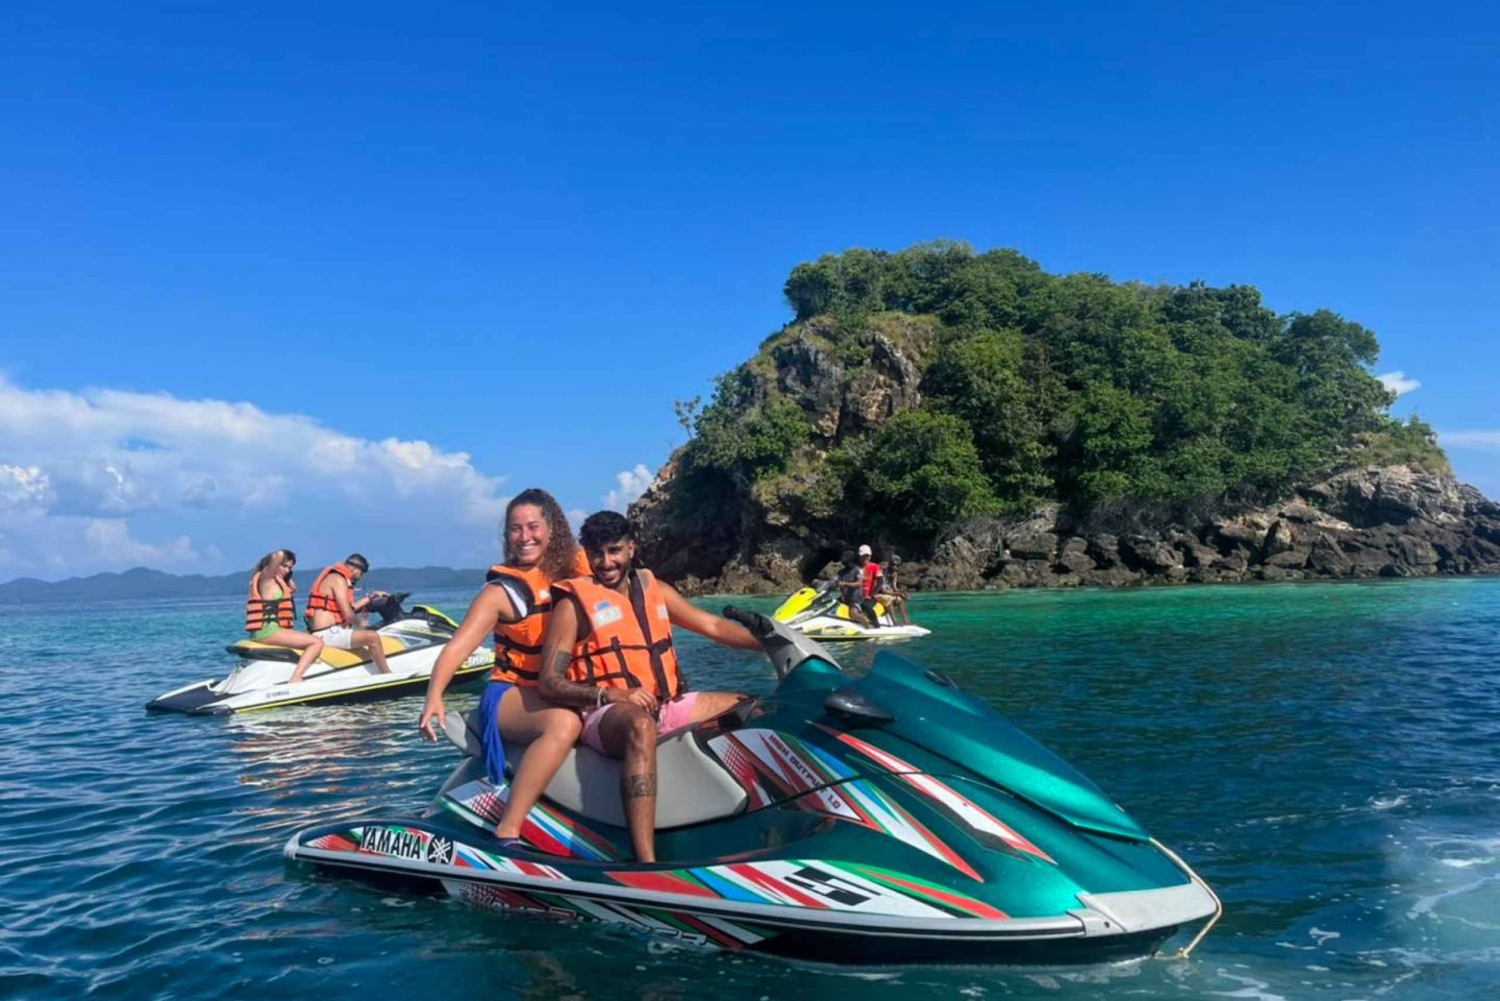 Patong Beach: Visit 9 Famous Islands in Phuket by Jet Ski